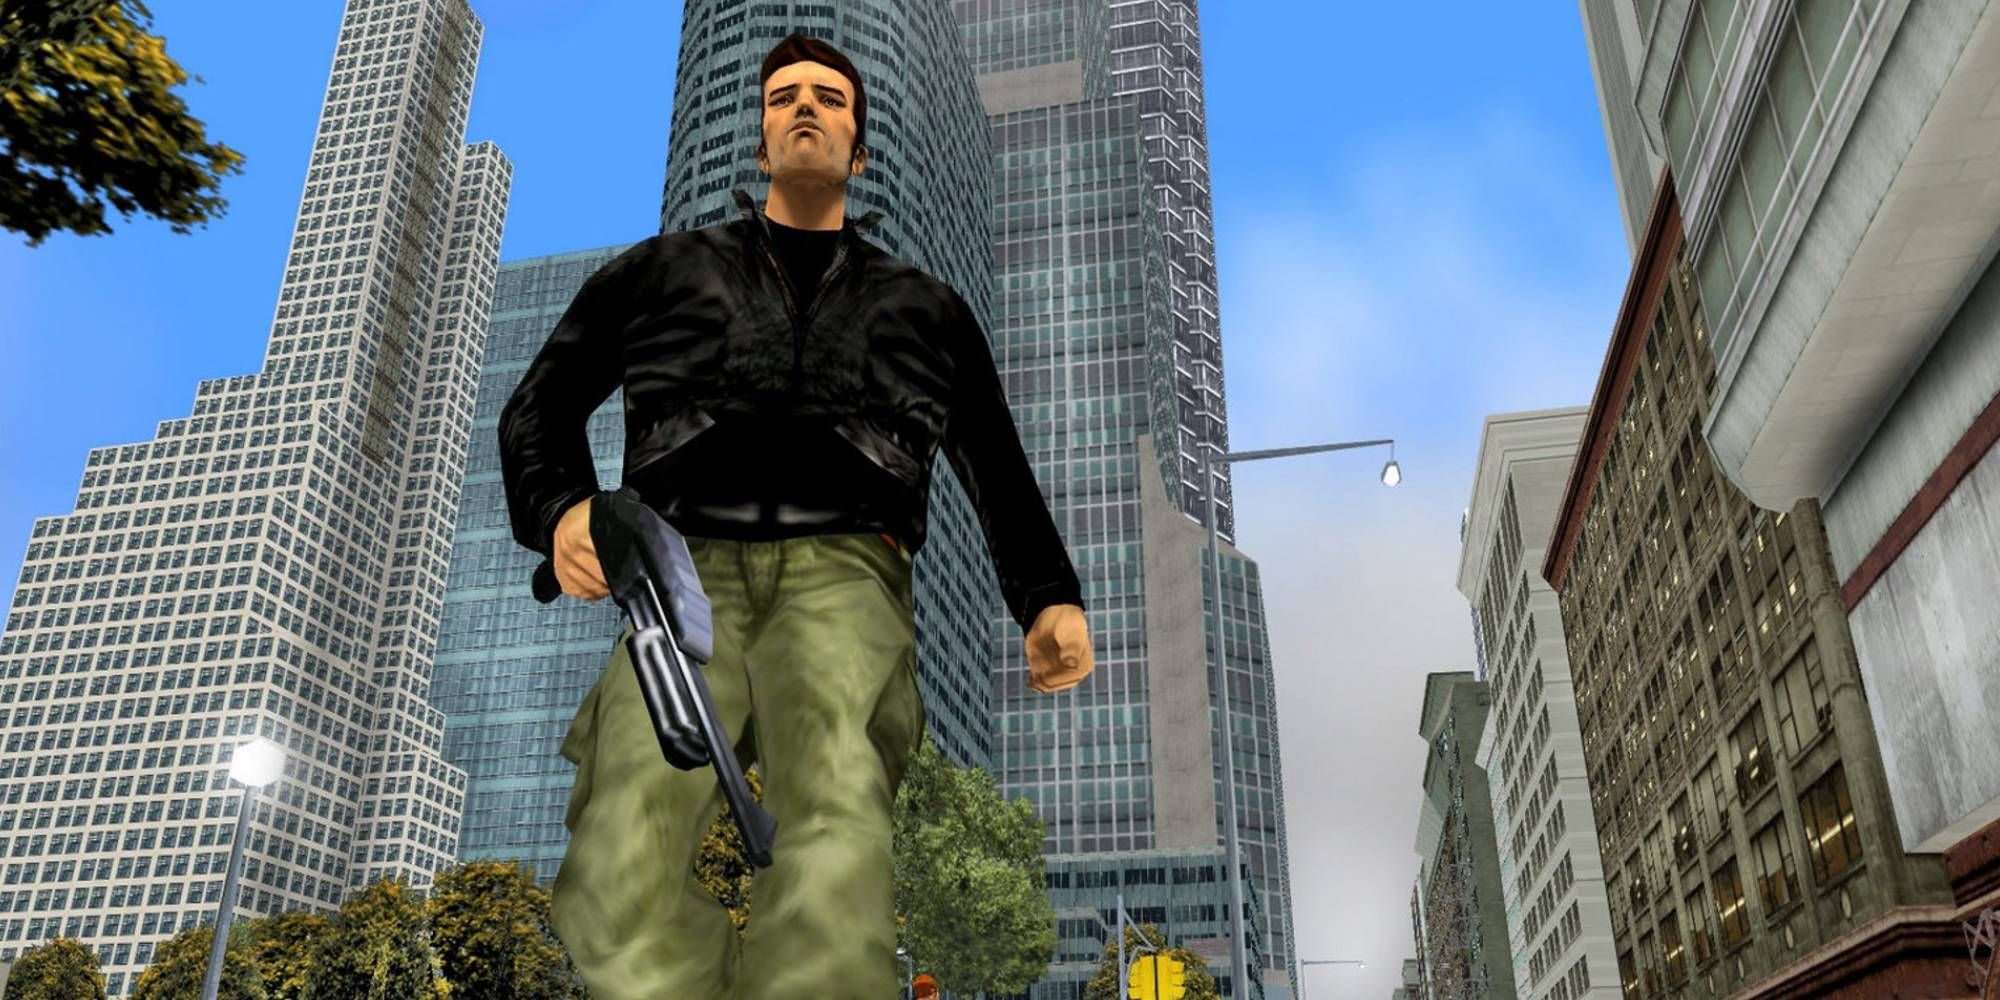 Claude walking down the street of Liberty City